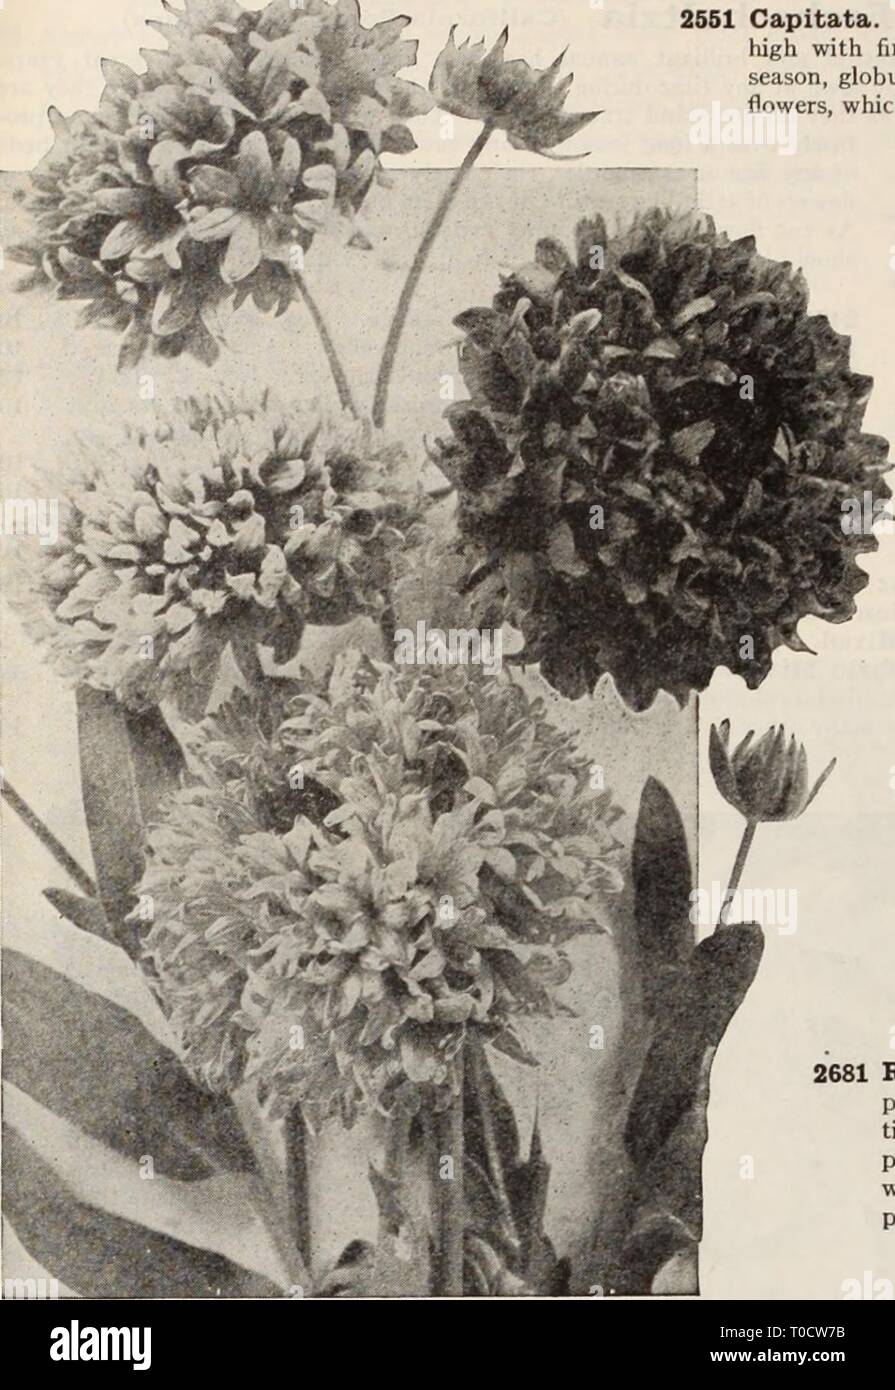 Dreer's garden book  Henry Dreer's garden book / Henry A. Dreer. dreersgardenbook1931dree Year:   RELIABLE FLOWER SEEDS^ r *    Gilia (Queen Ann's Thimble) per pkt. 2551 Capitata. This is a very graceful annual, growing about 2 feet high with fine feathery foliage and bearing freely over a long season, globular heads, about 1 inch across, of rich lavender blue flowers, which last well when cut. } oz., 25 cts $0 10 Globe Amaranth rcomphrena) Popularly known as 'Bachelor's Button,' a first-rate bedding plant; the flowers resemble clover heads and can be dried and used in winter bouquets. Cornflo Stock Photo